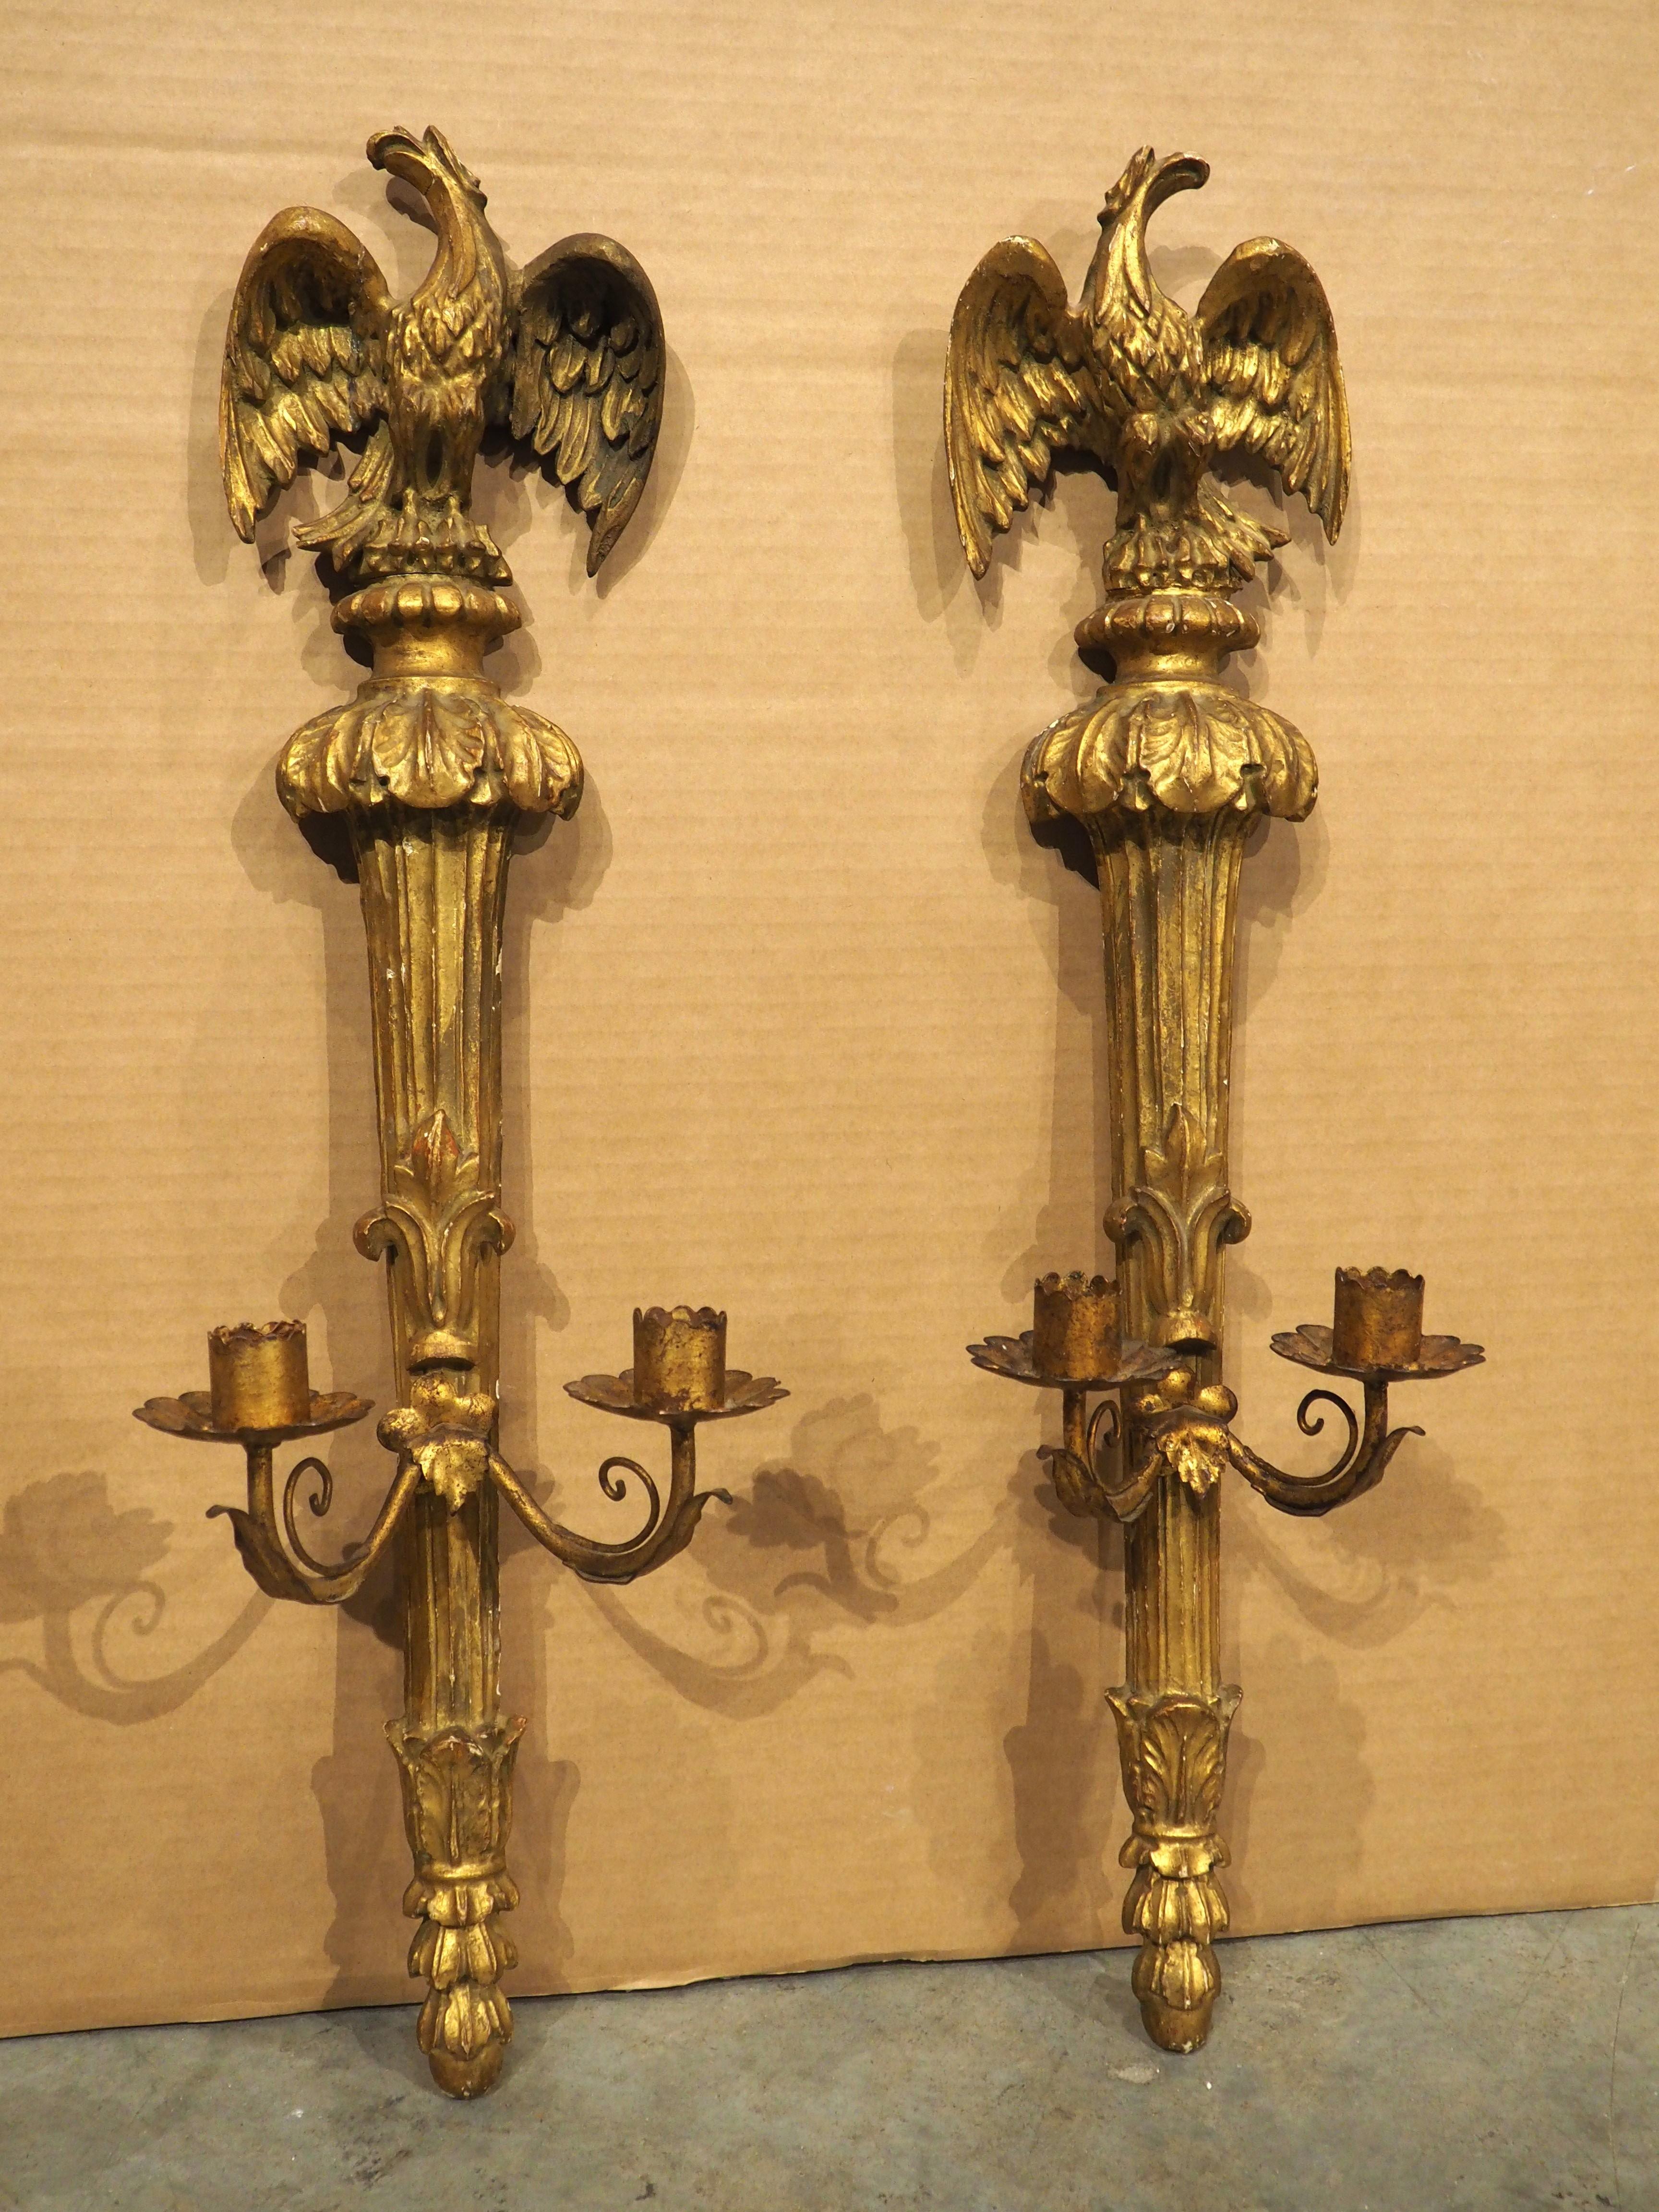 Pair of French Empire Period Giltwood Eagle Sconces, Circa 1815 For Sale 5